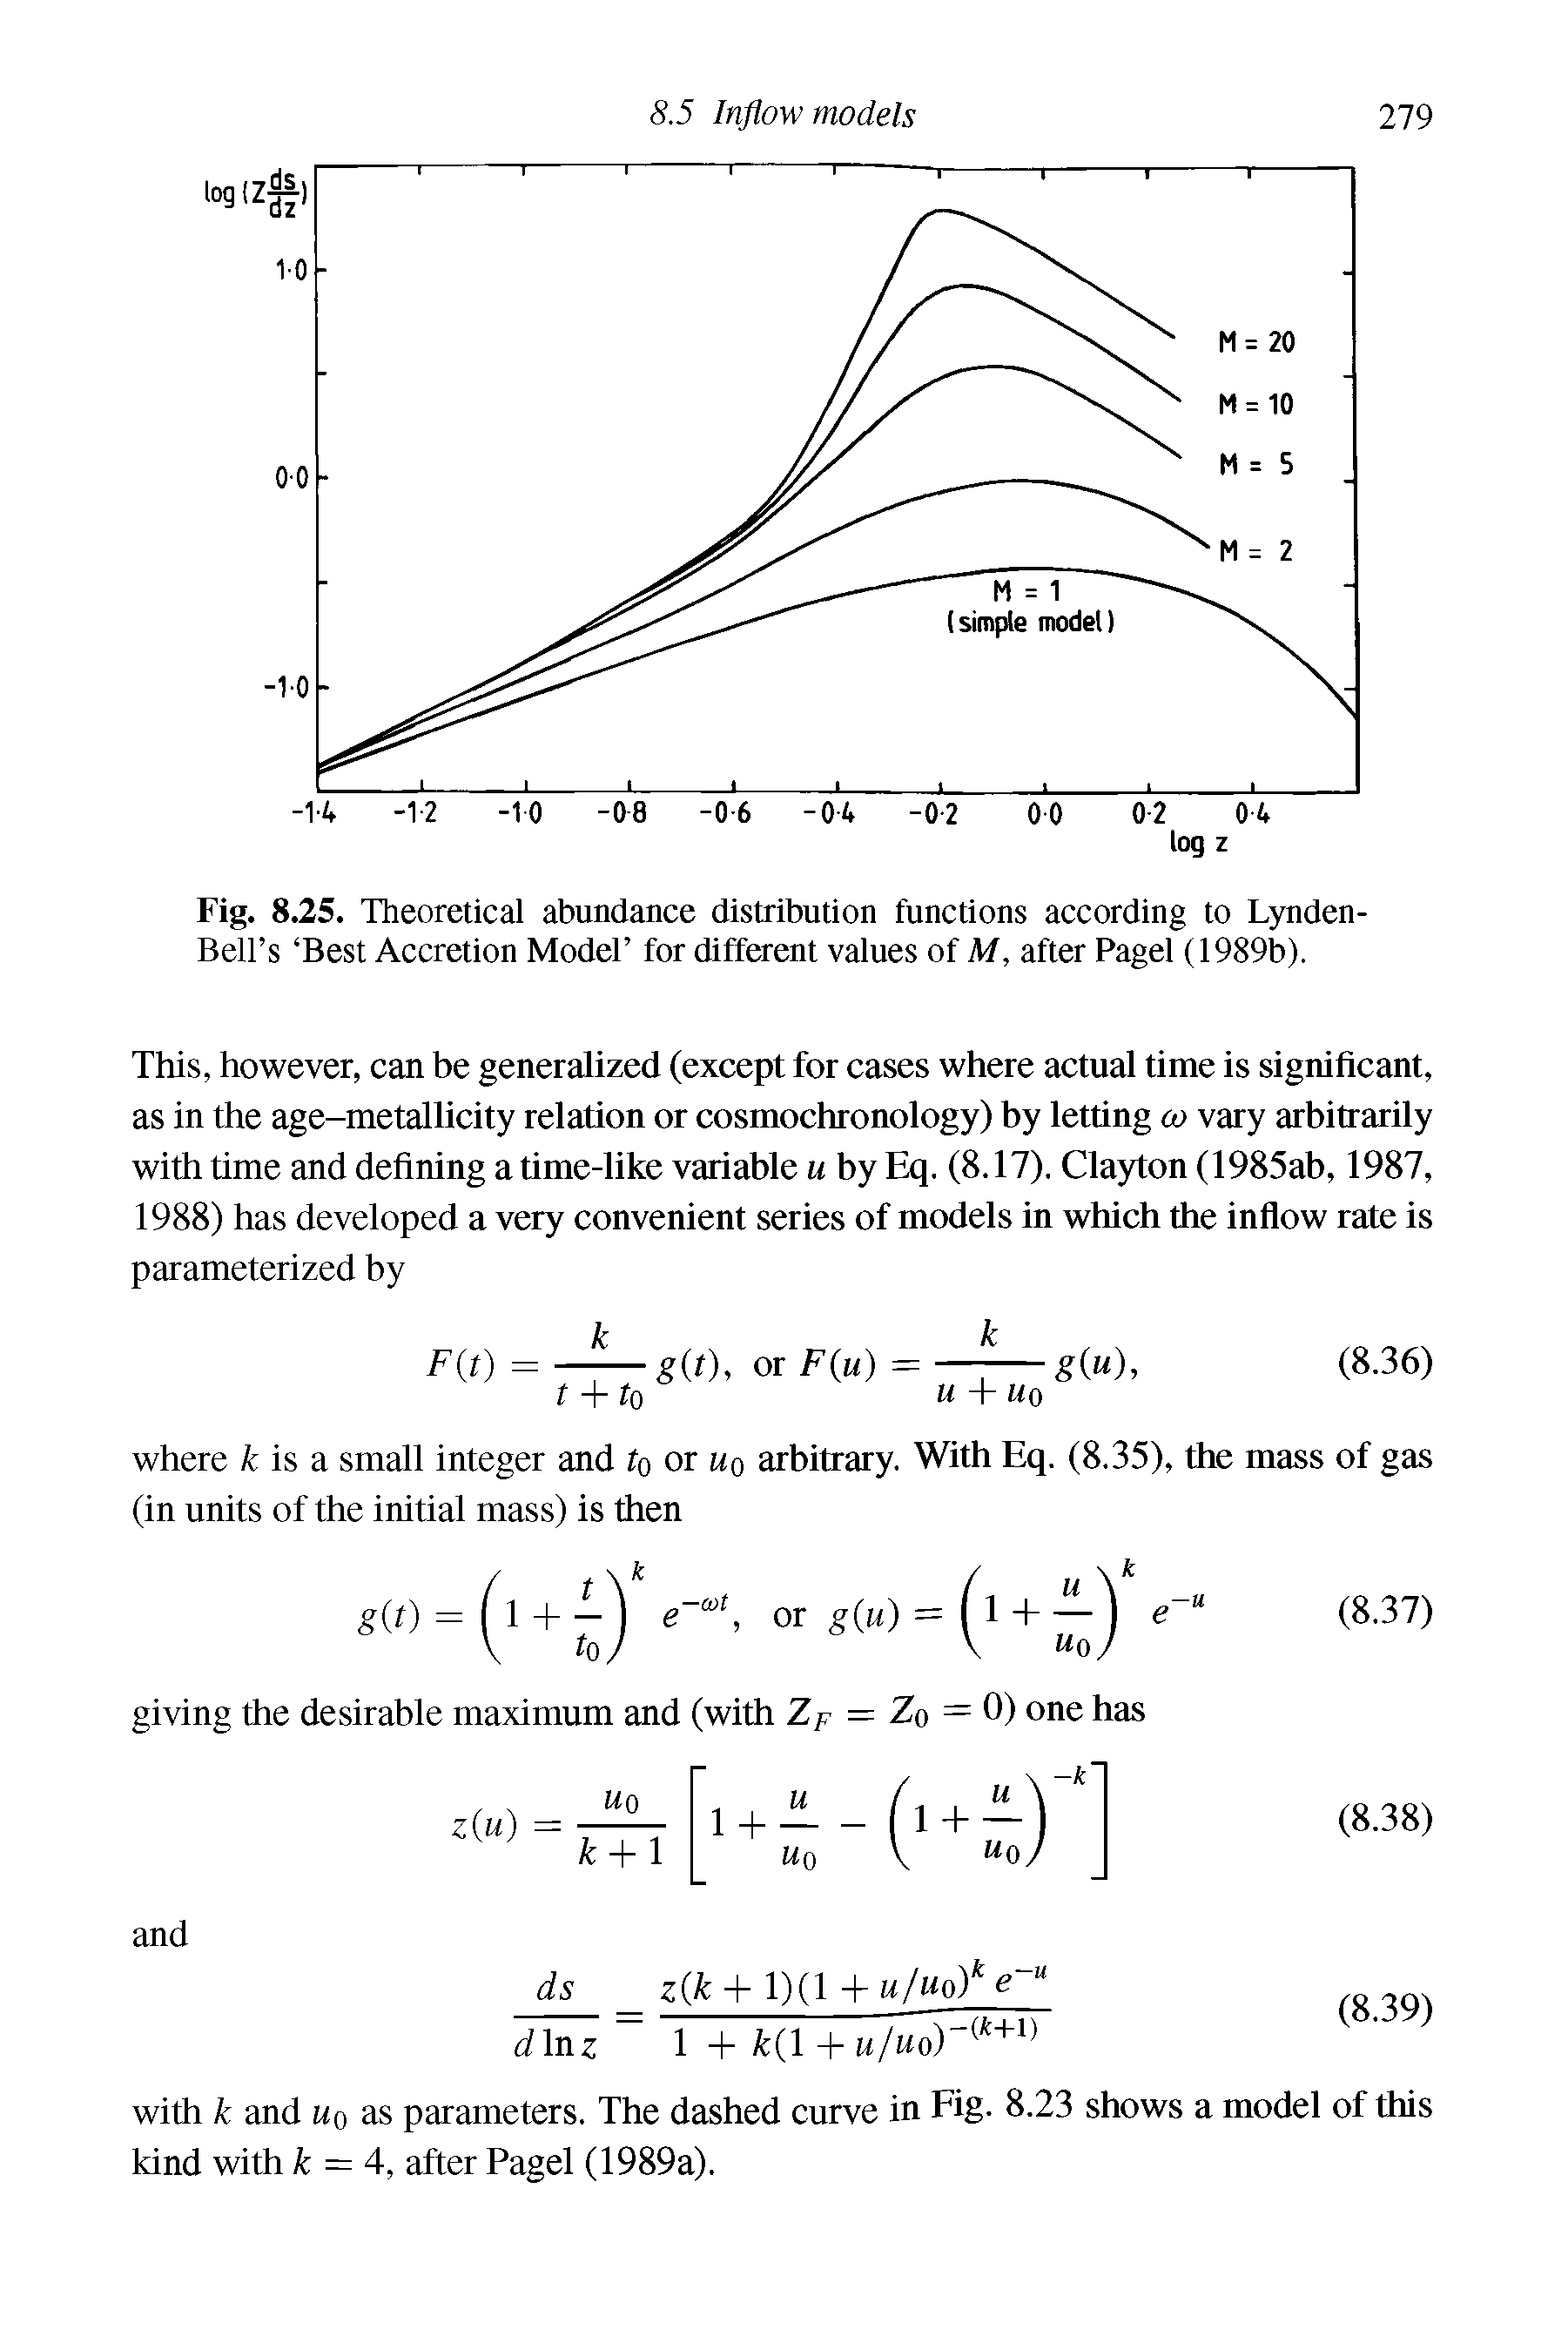 Fig. 8.25. Theoretical abundance distribution functions according to Lynden-Bell s Best Accretion Model for different values of M, after Pagel (1989b).